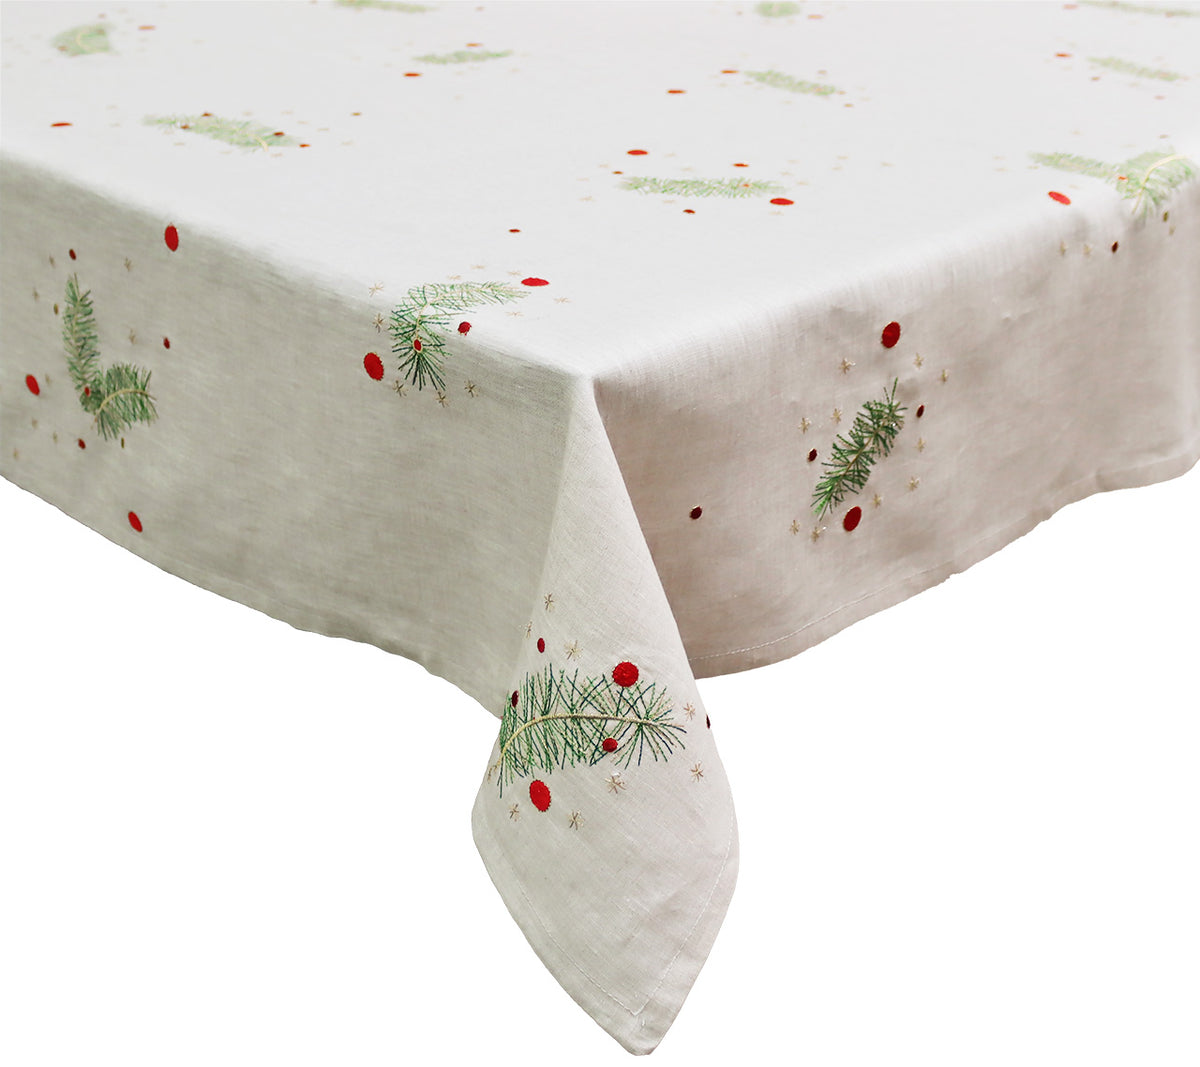 Evergreen Tablecloth in Natural, Red & Green